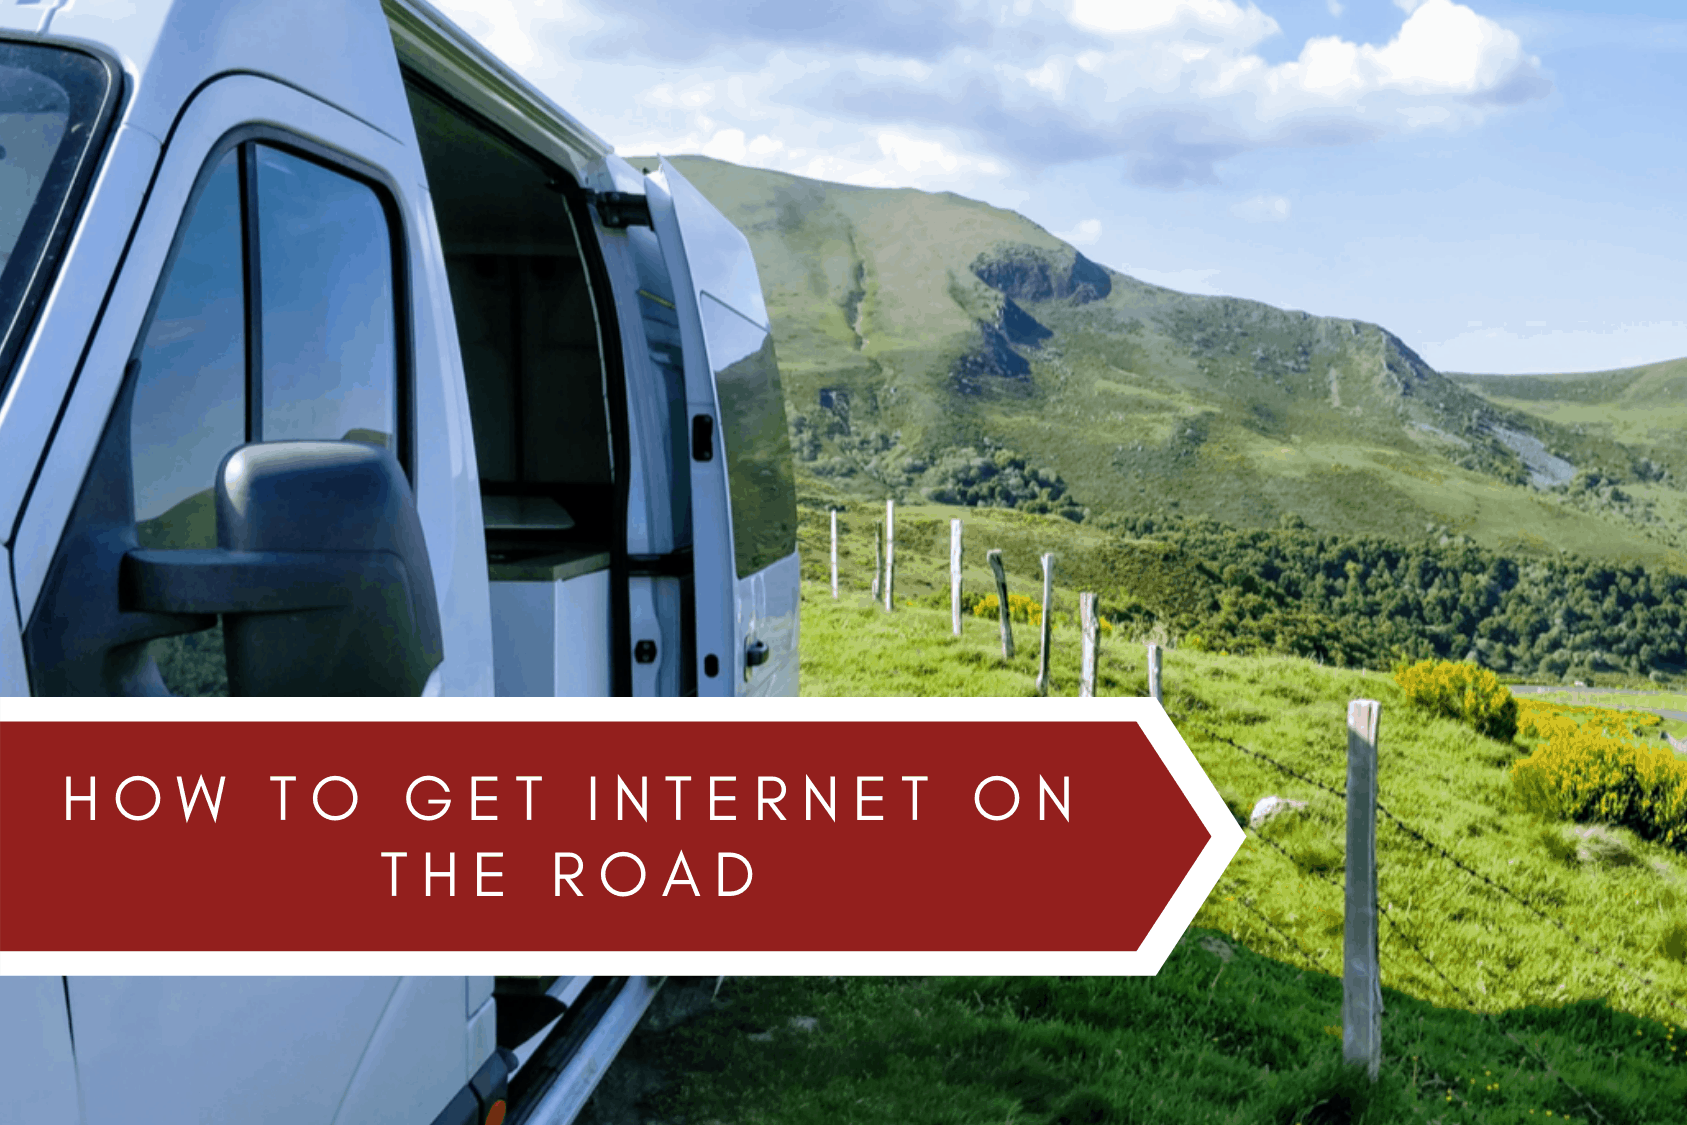 Internet on the road